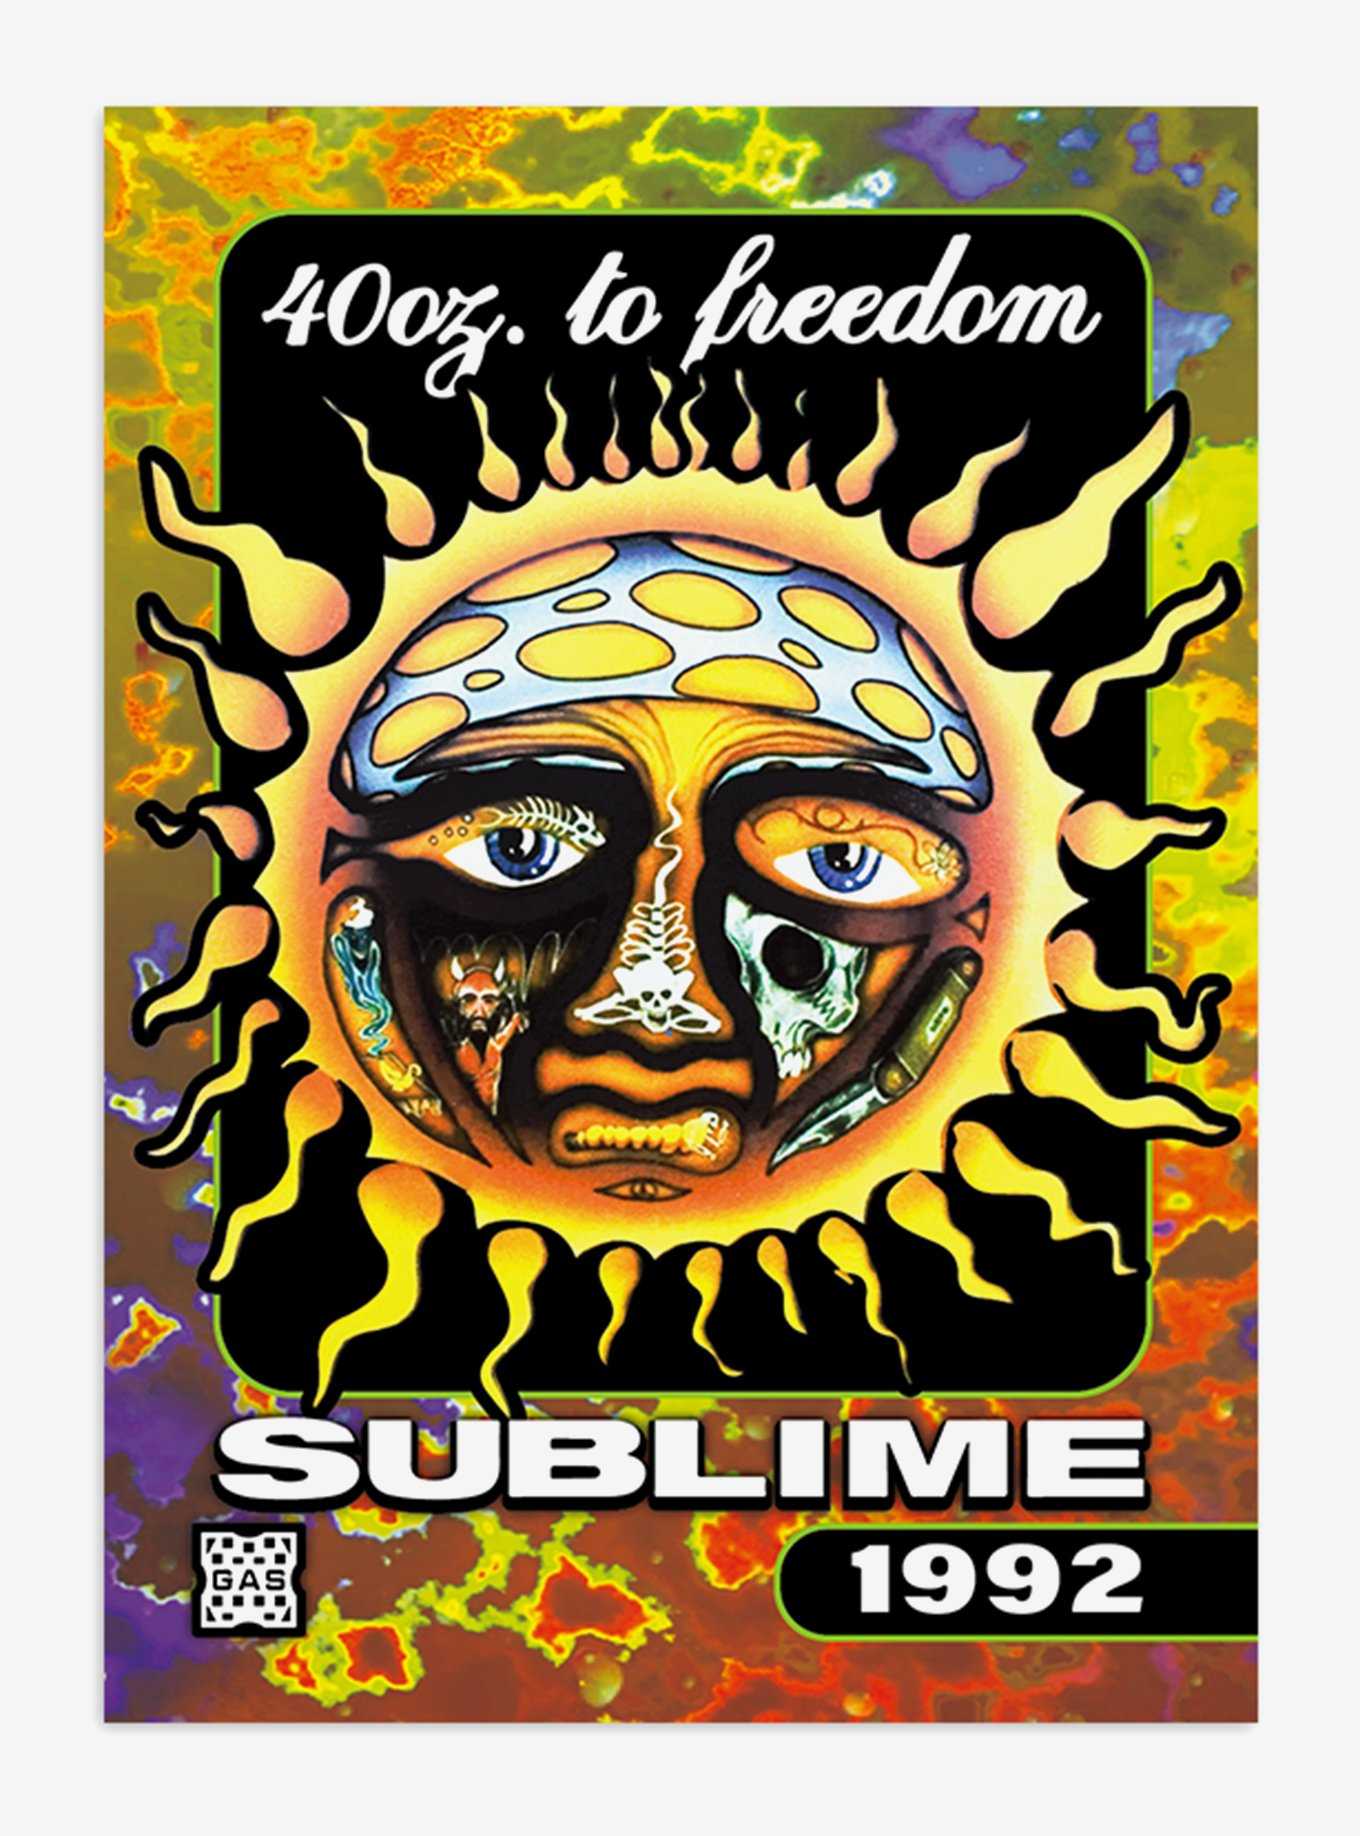 Sublime 40 Oz. To Freedom 1992 Collectible Card, , hi-res